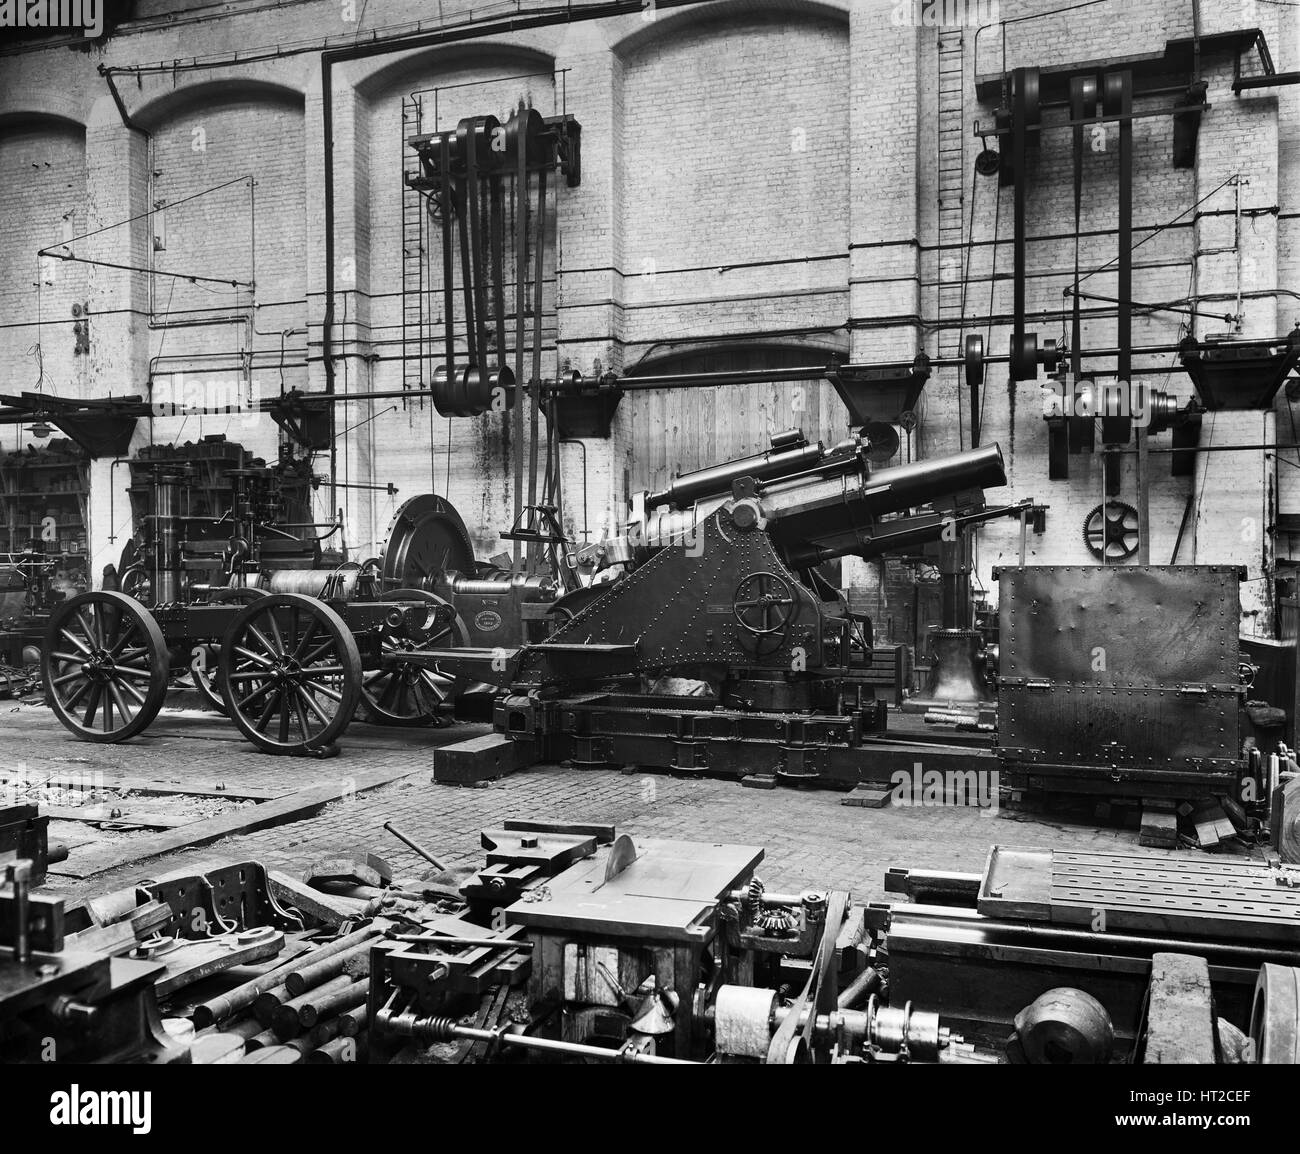 The gun carriage works, Cunard Engine Works, Derby Road, Kirkdale, Liverpool, January 1918. Artist: H Bedford Lemere. Stock Photo